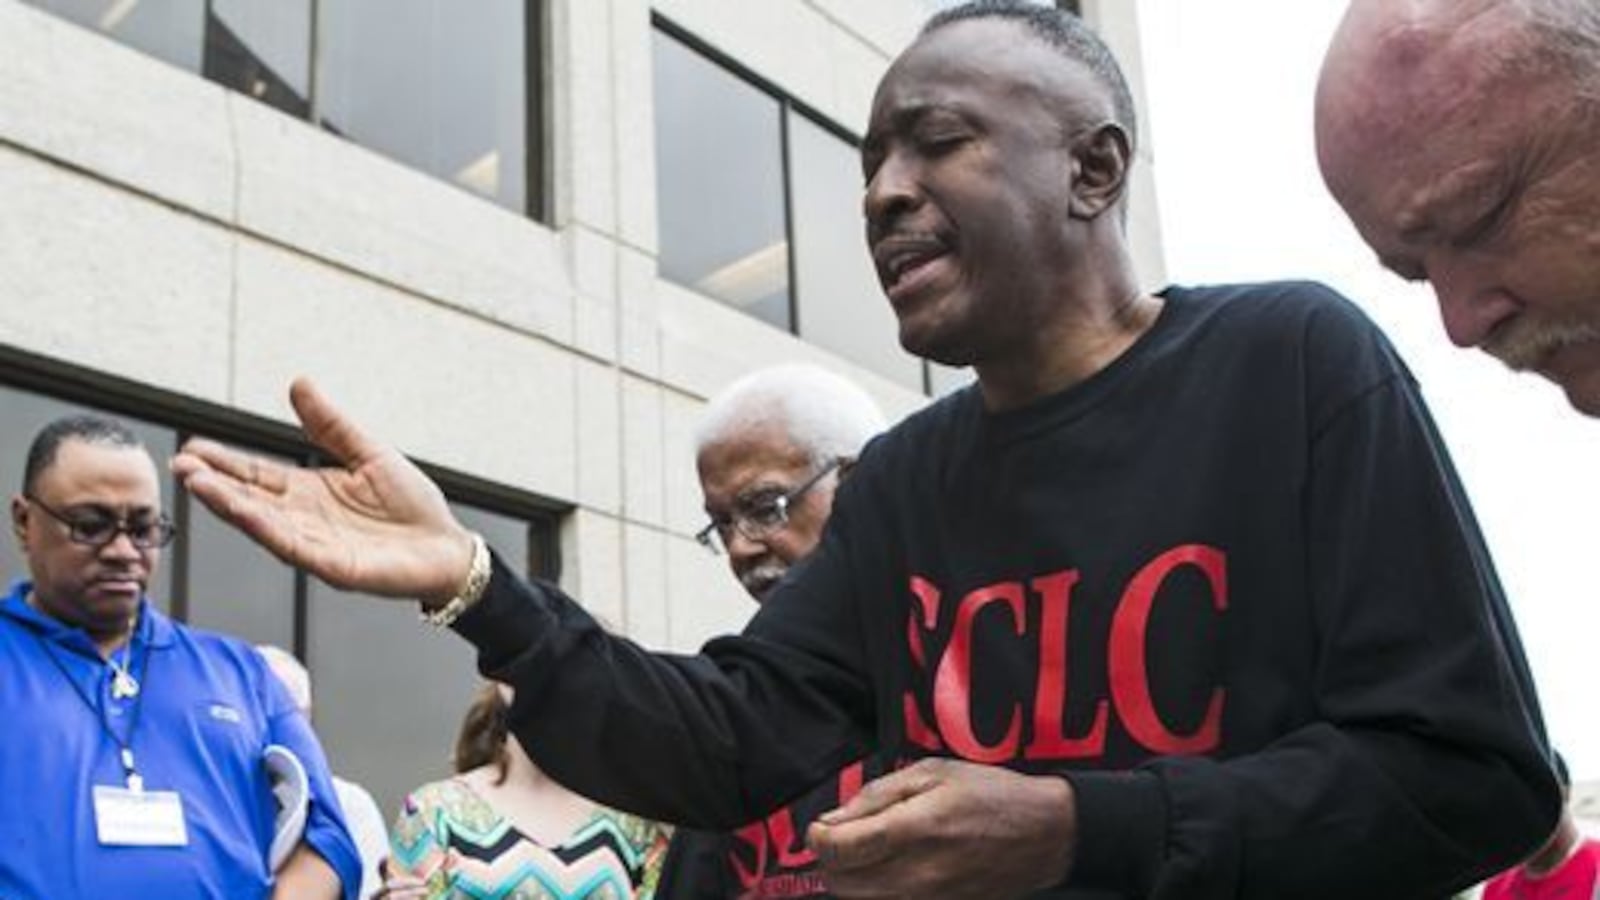 Pastor Dwight Montgomery, president of the Memphis chapter of the Southern Christian Leadership Conference, prays with Kellogg workers who filed race-based discrimination complaints in 2014. Montgomery died on Sept. 13 at the age of 67.